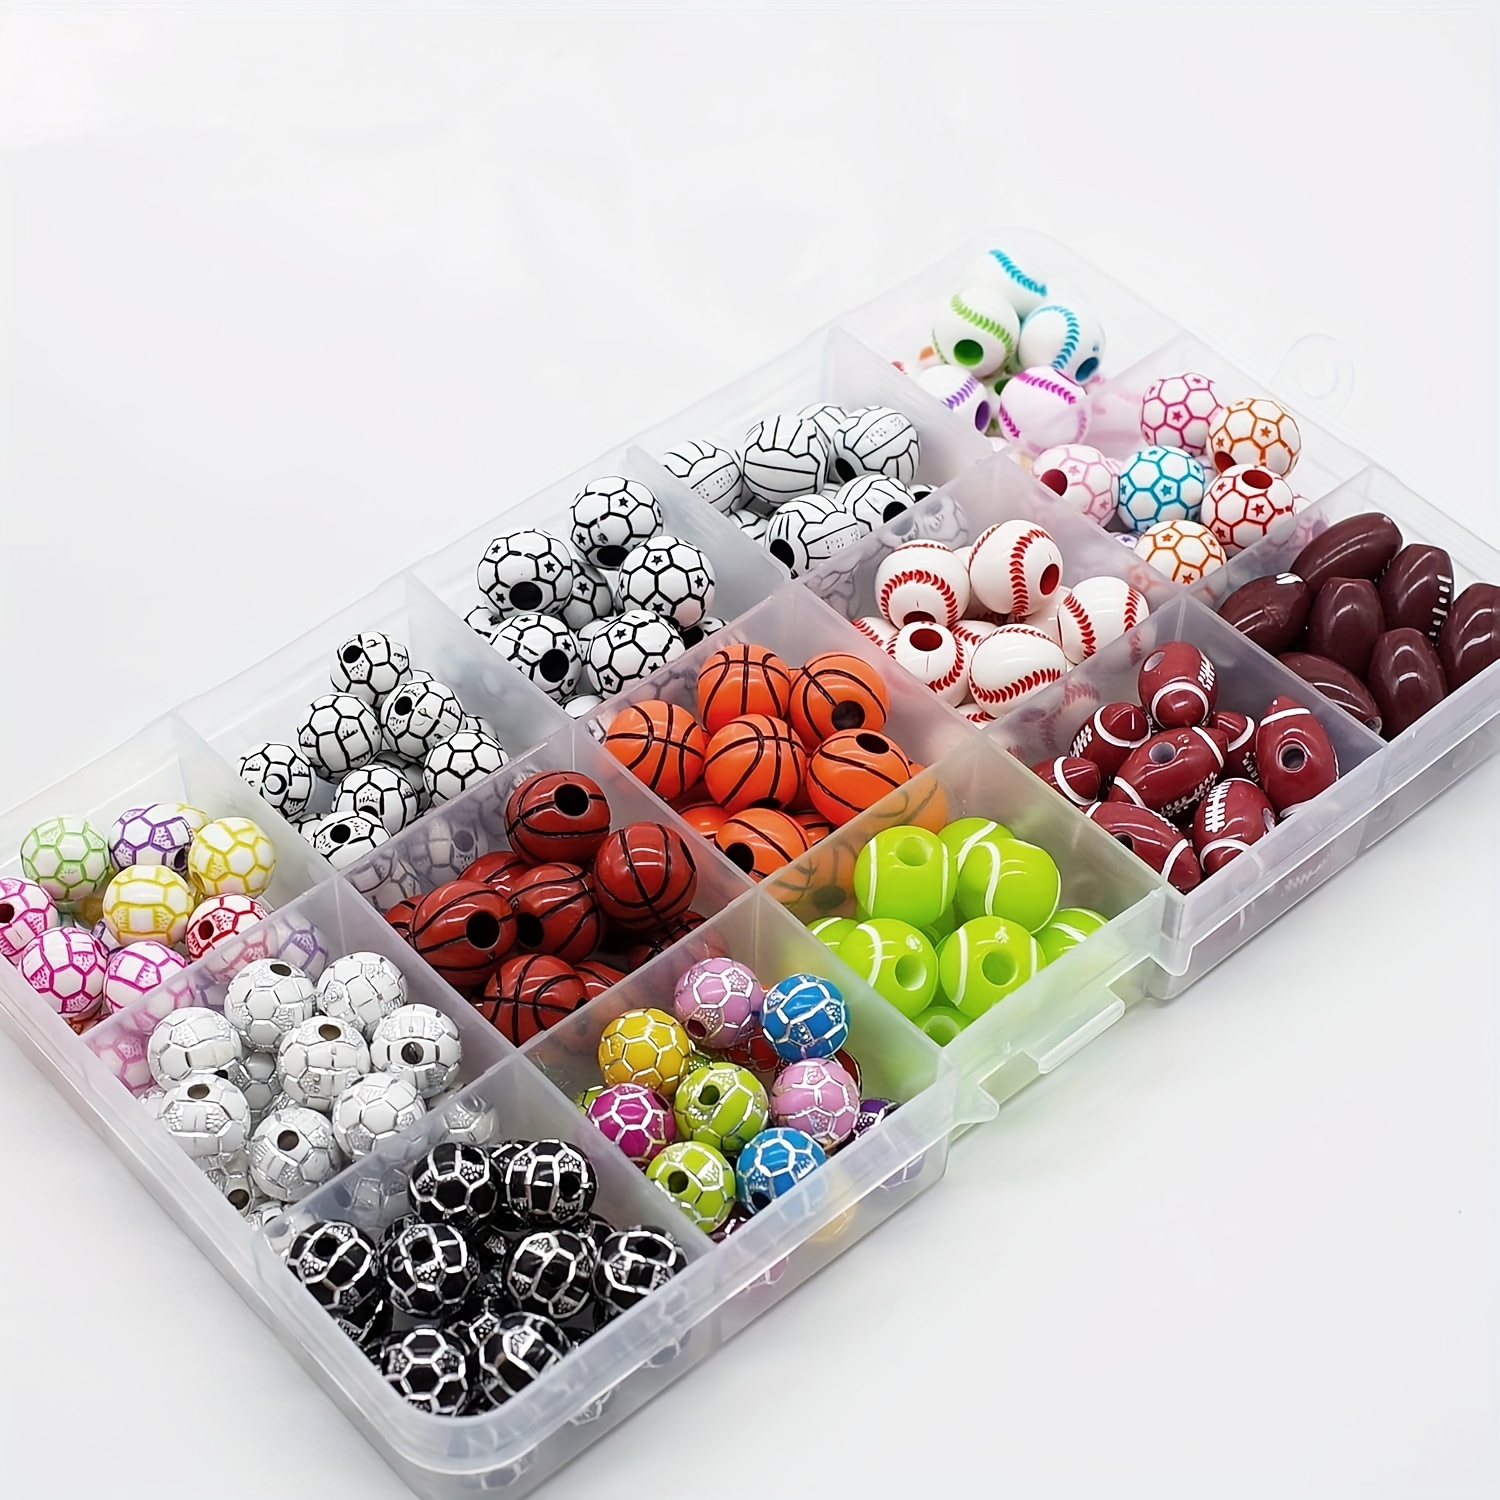 

200pcs Sports Ball Beads For Jewelry Making Baseball Basketball Football Volleyball Acrylic Beads Diy Bracelet Necklace Key Bag Chain Craft Supplies With Box